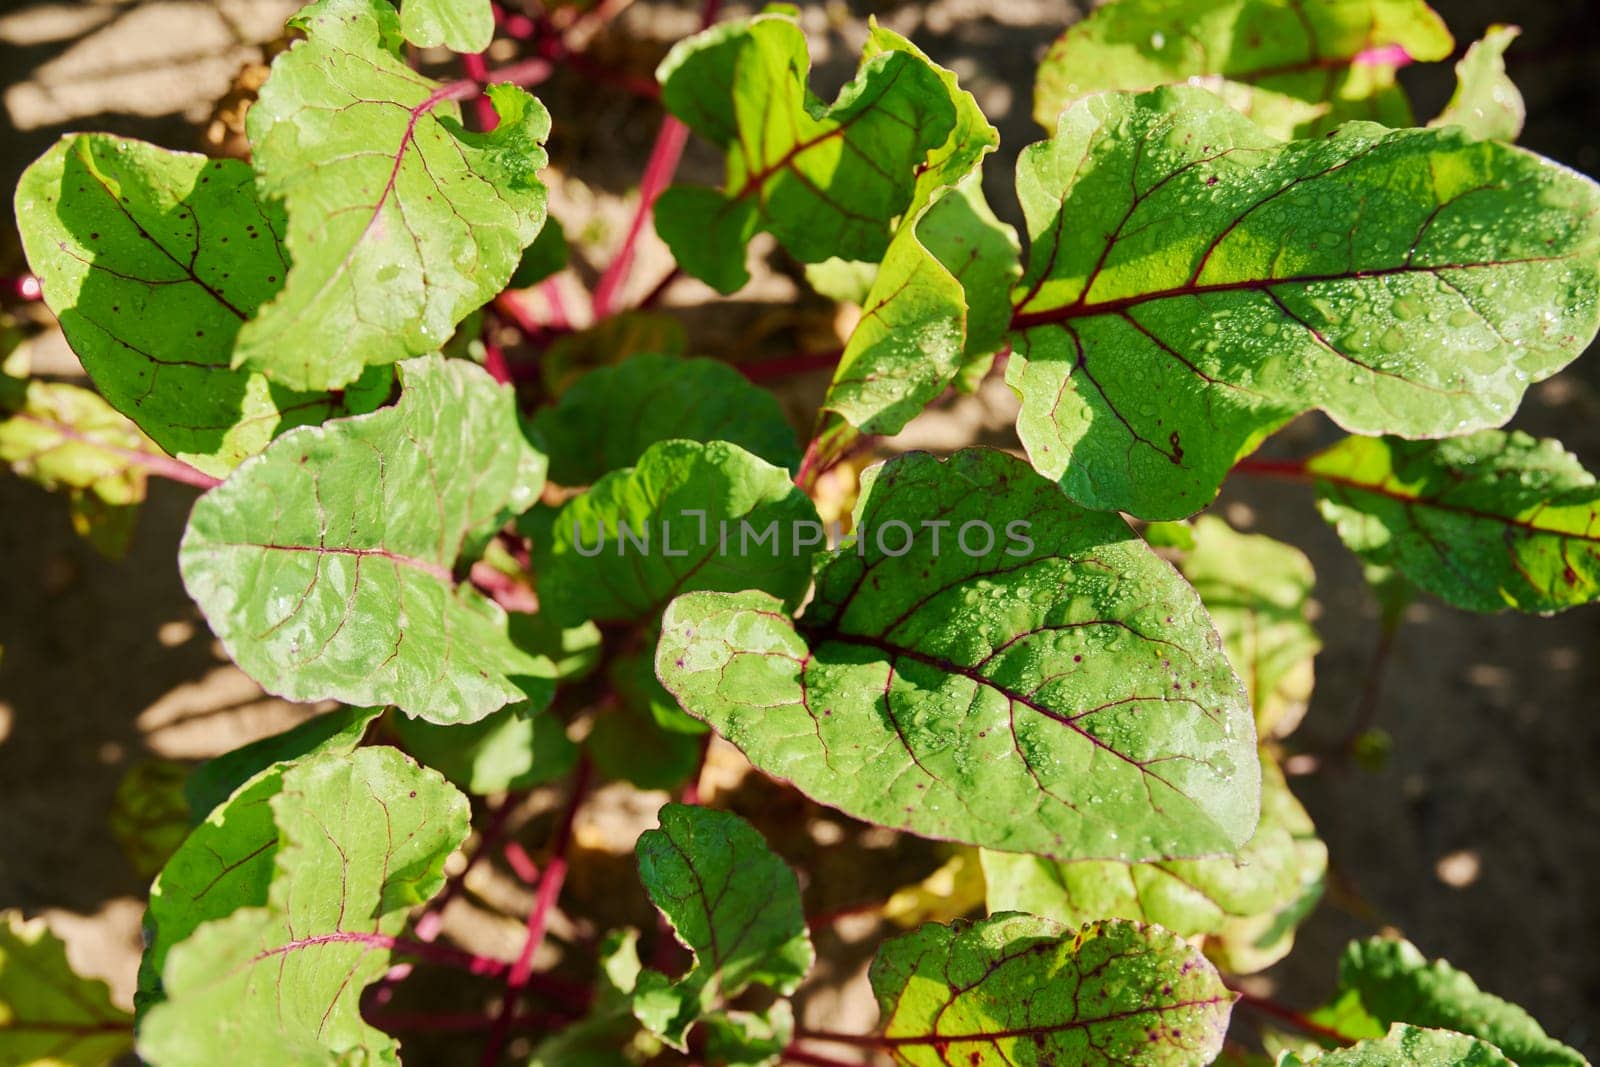 Beet leaves on a bed close-up top view. Agriculture, farmers market, organic vegetables